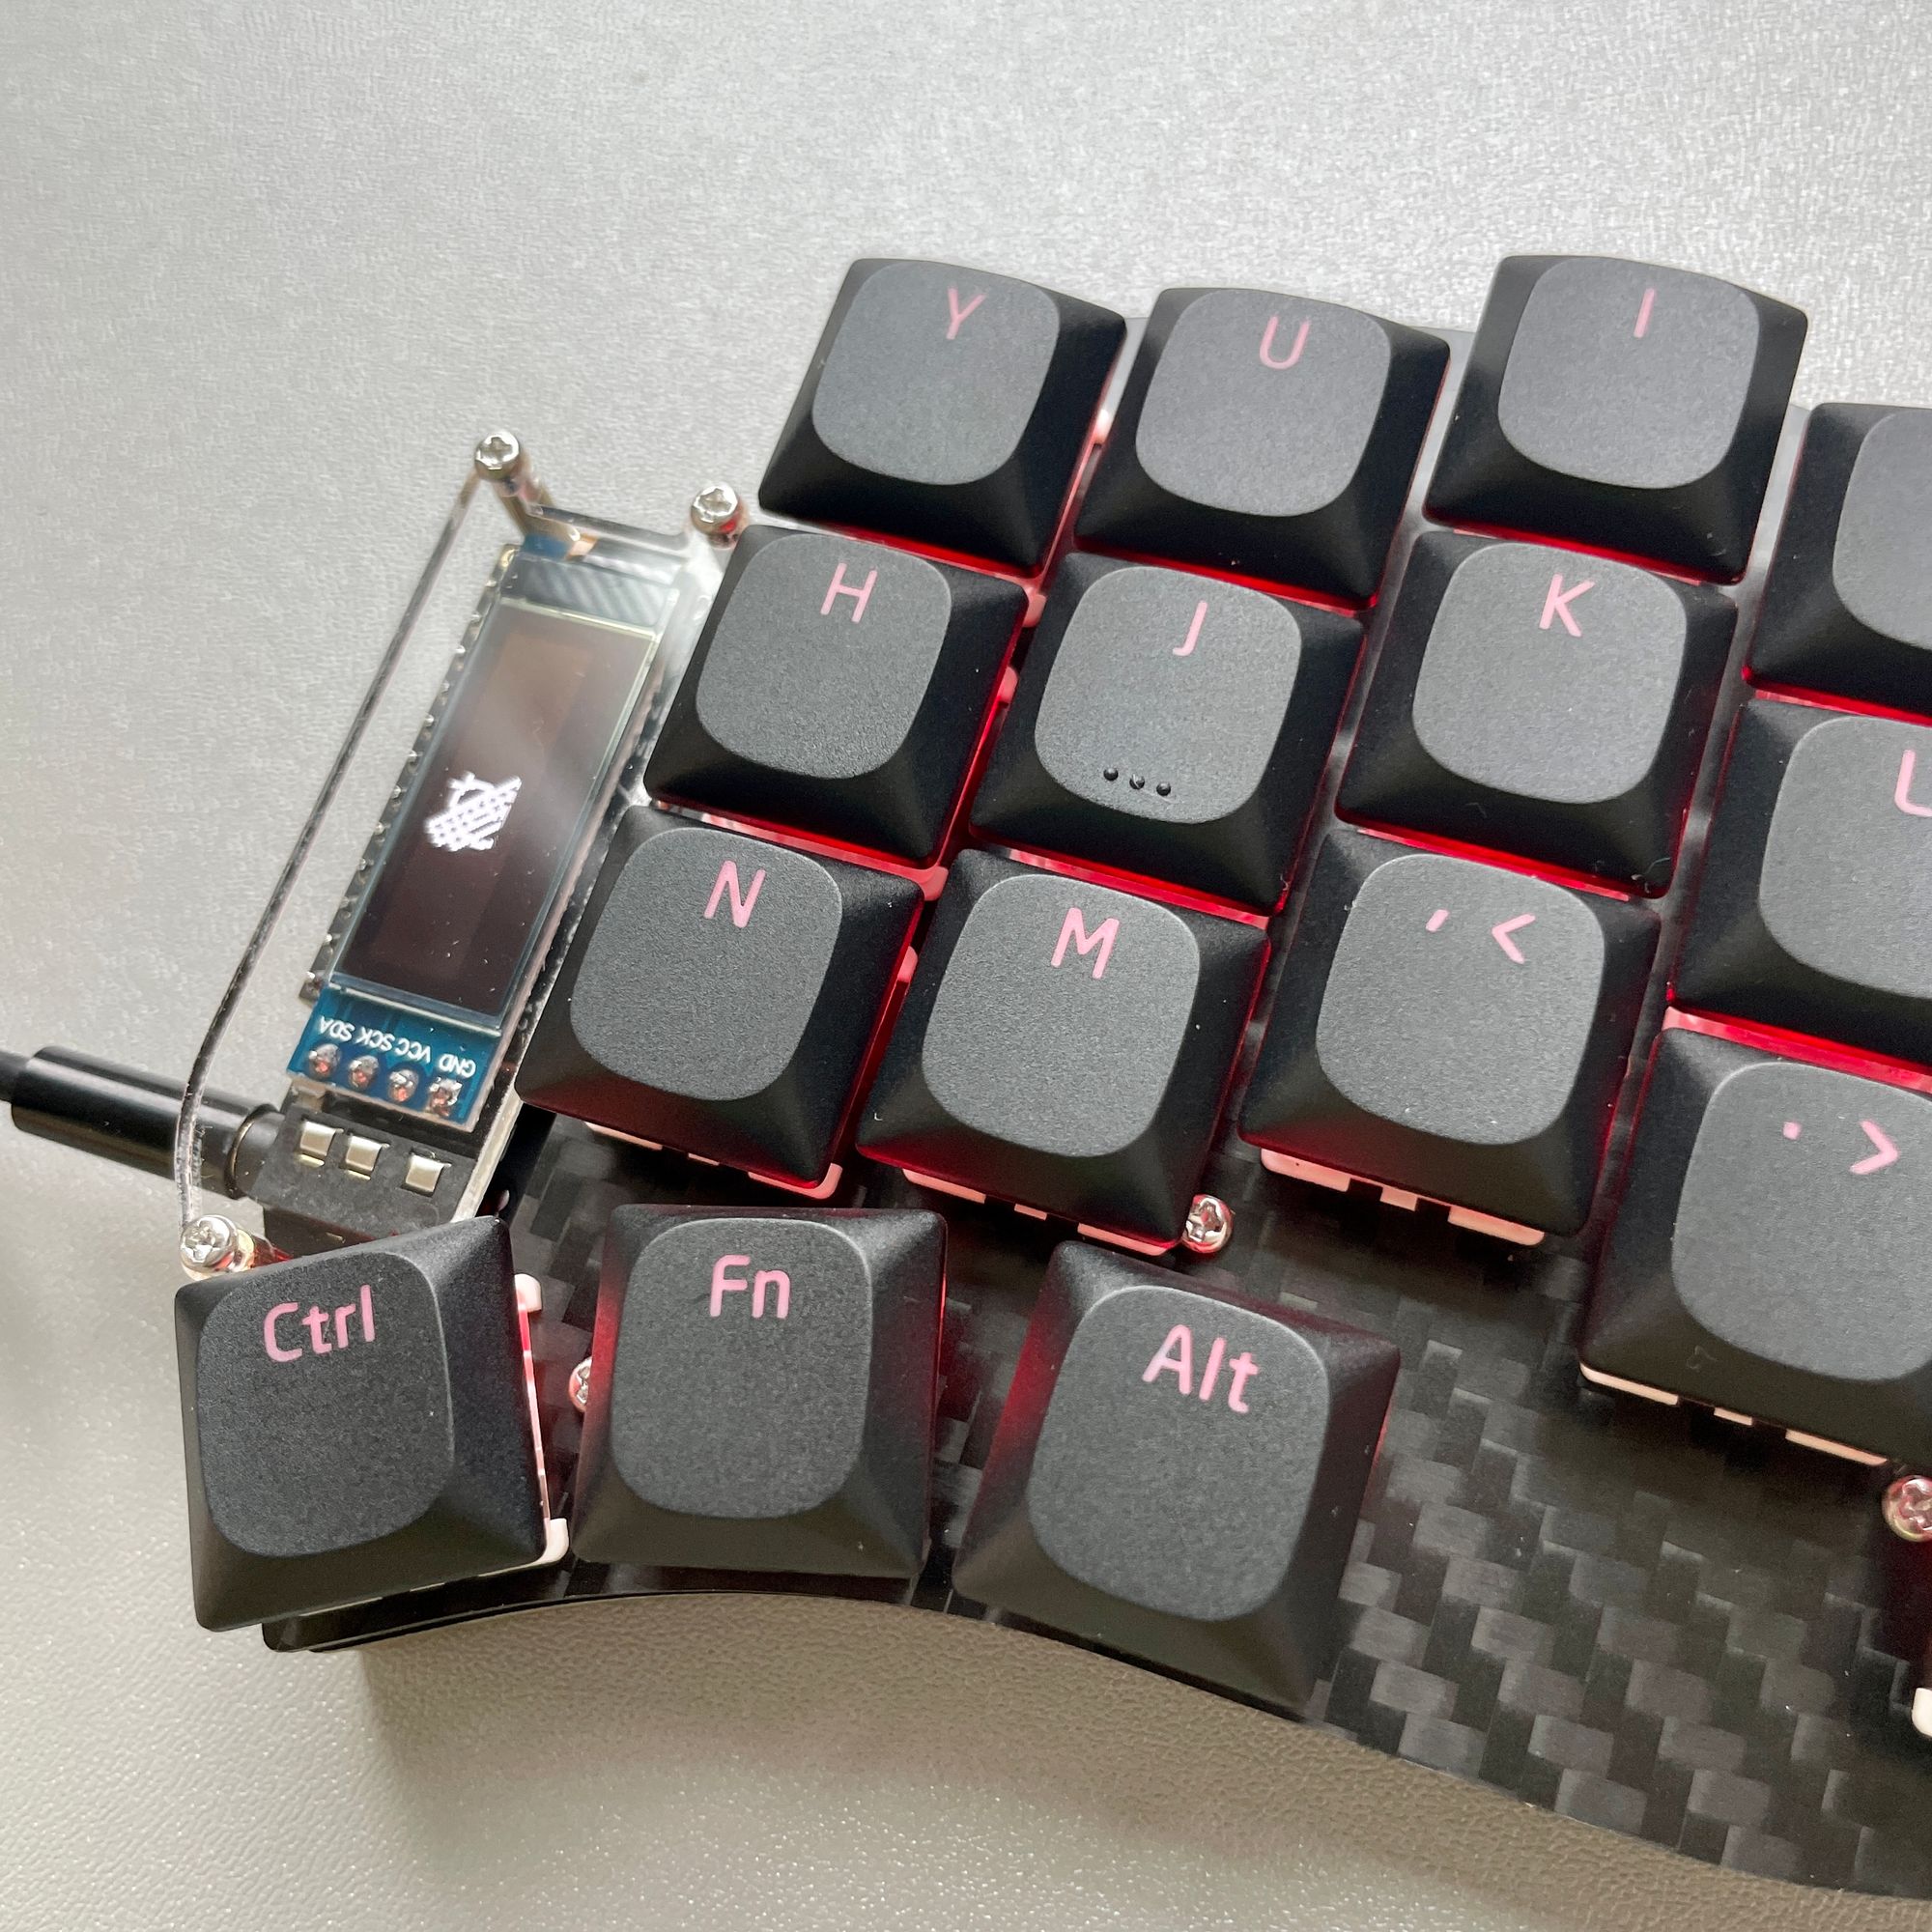 Keycaps on Swoop Keyboard with RGB LEDs and OLED display